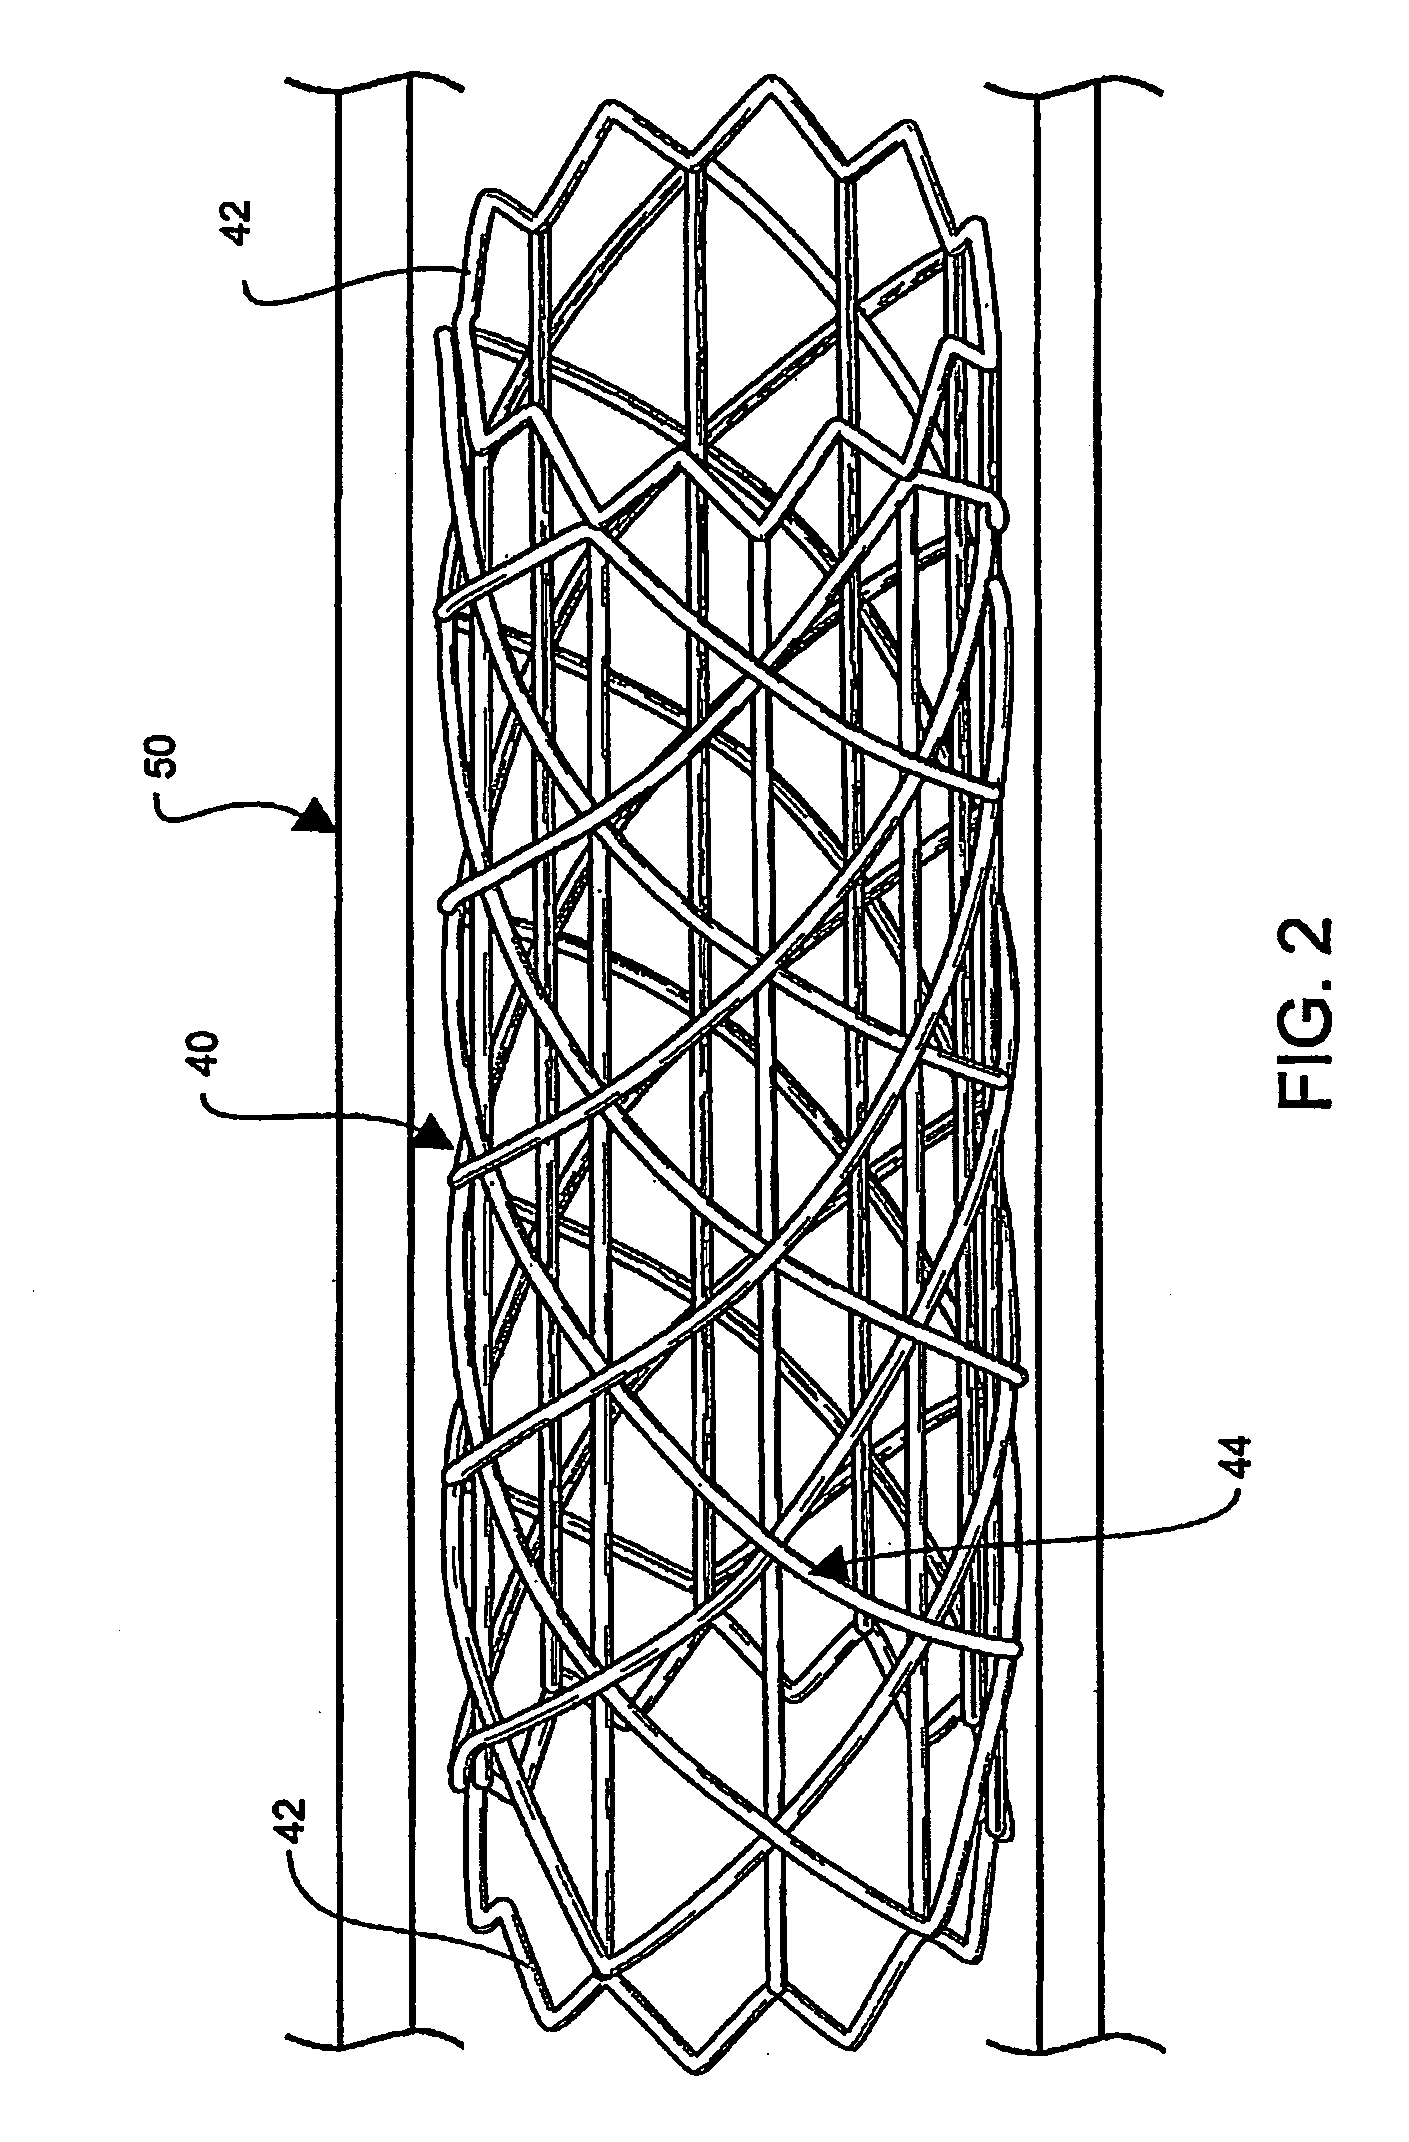 Hybrid Biodegradable/Non-Biodegradable Stent, Delivery System and Method of Treating a Vascular Condition